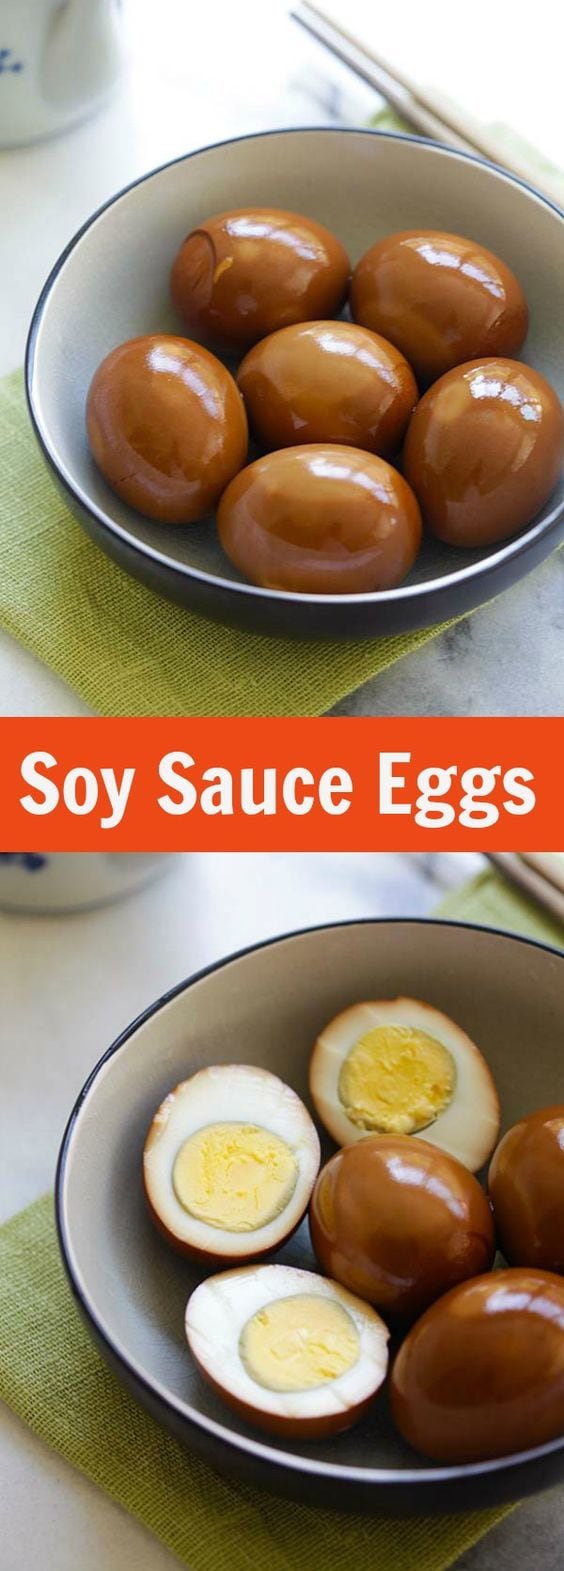 Soy Sauce Eggs - easy and healthy hard-boiled eggs steeped in a soy sauce mixture. This soy sauce eggs recipe yields delicious results | rasamalaysia.com